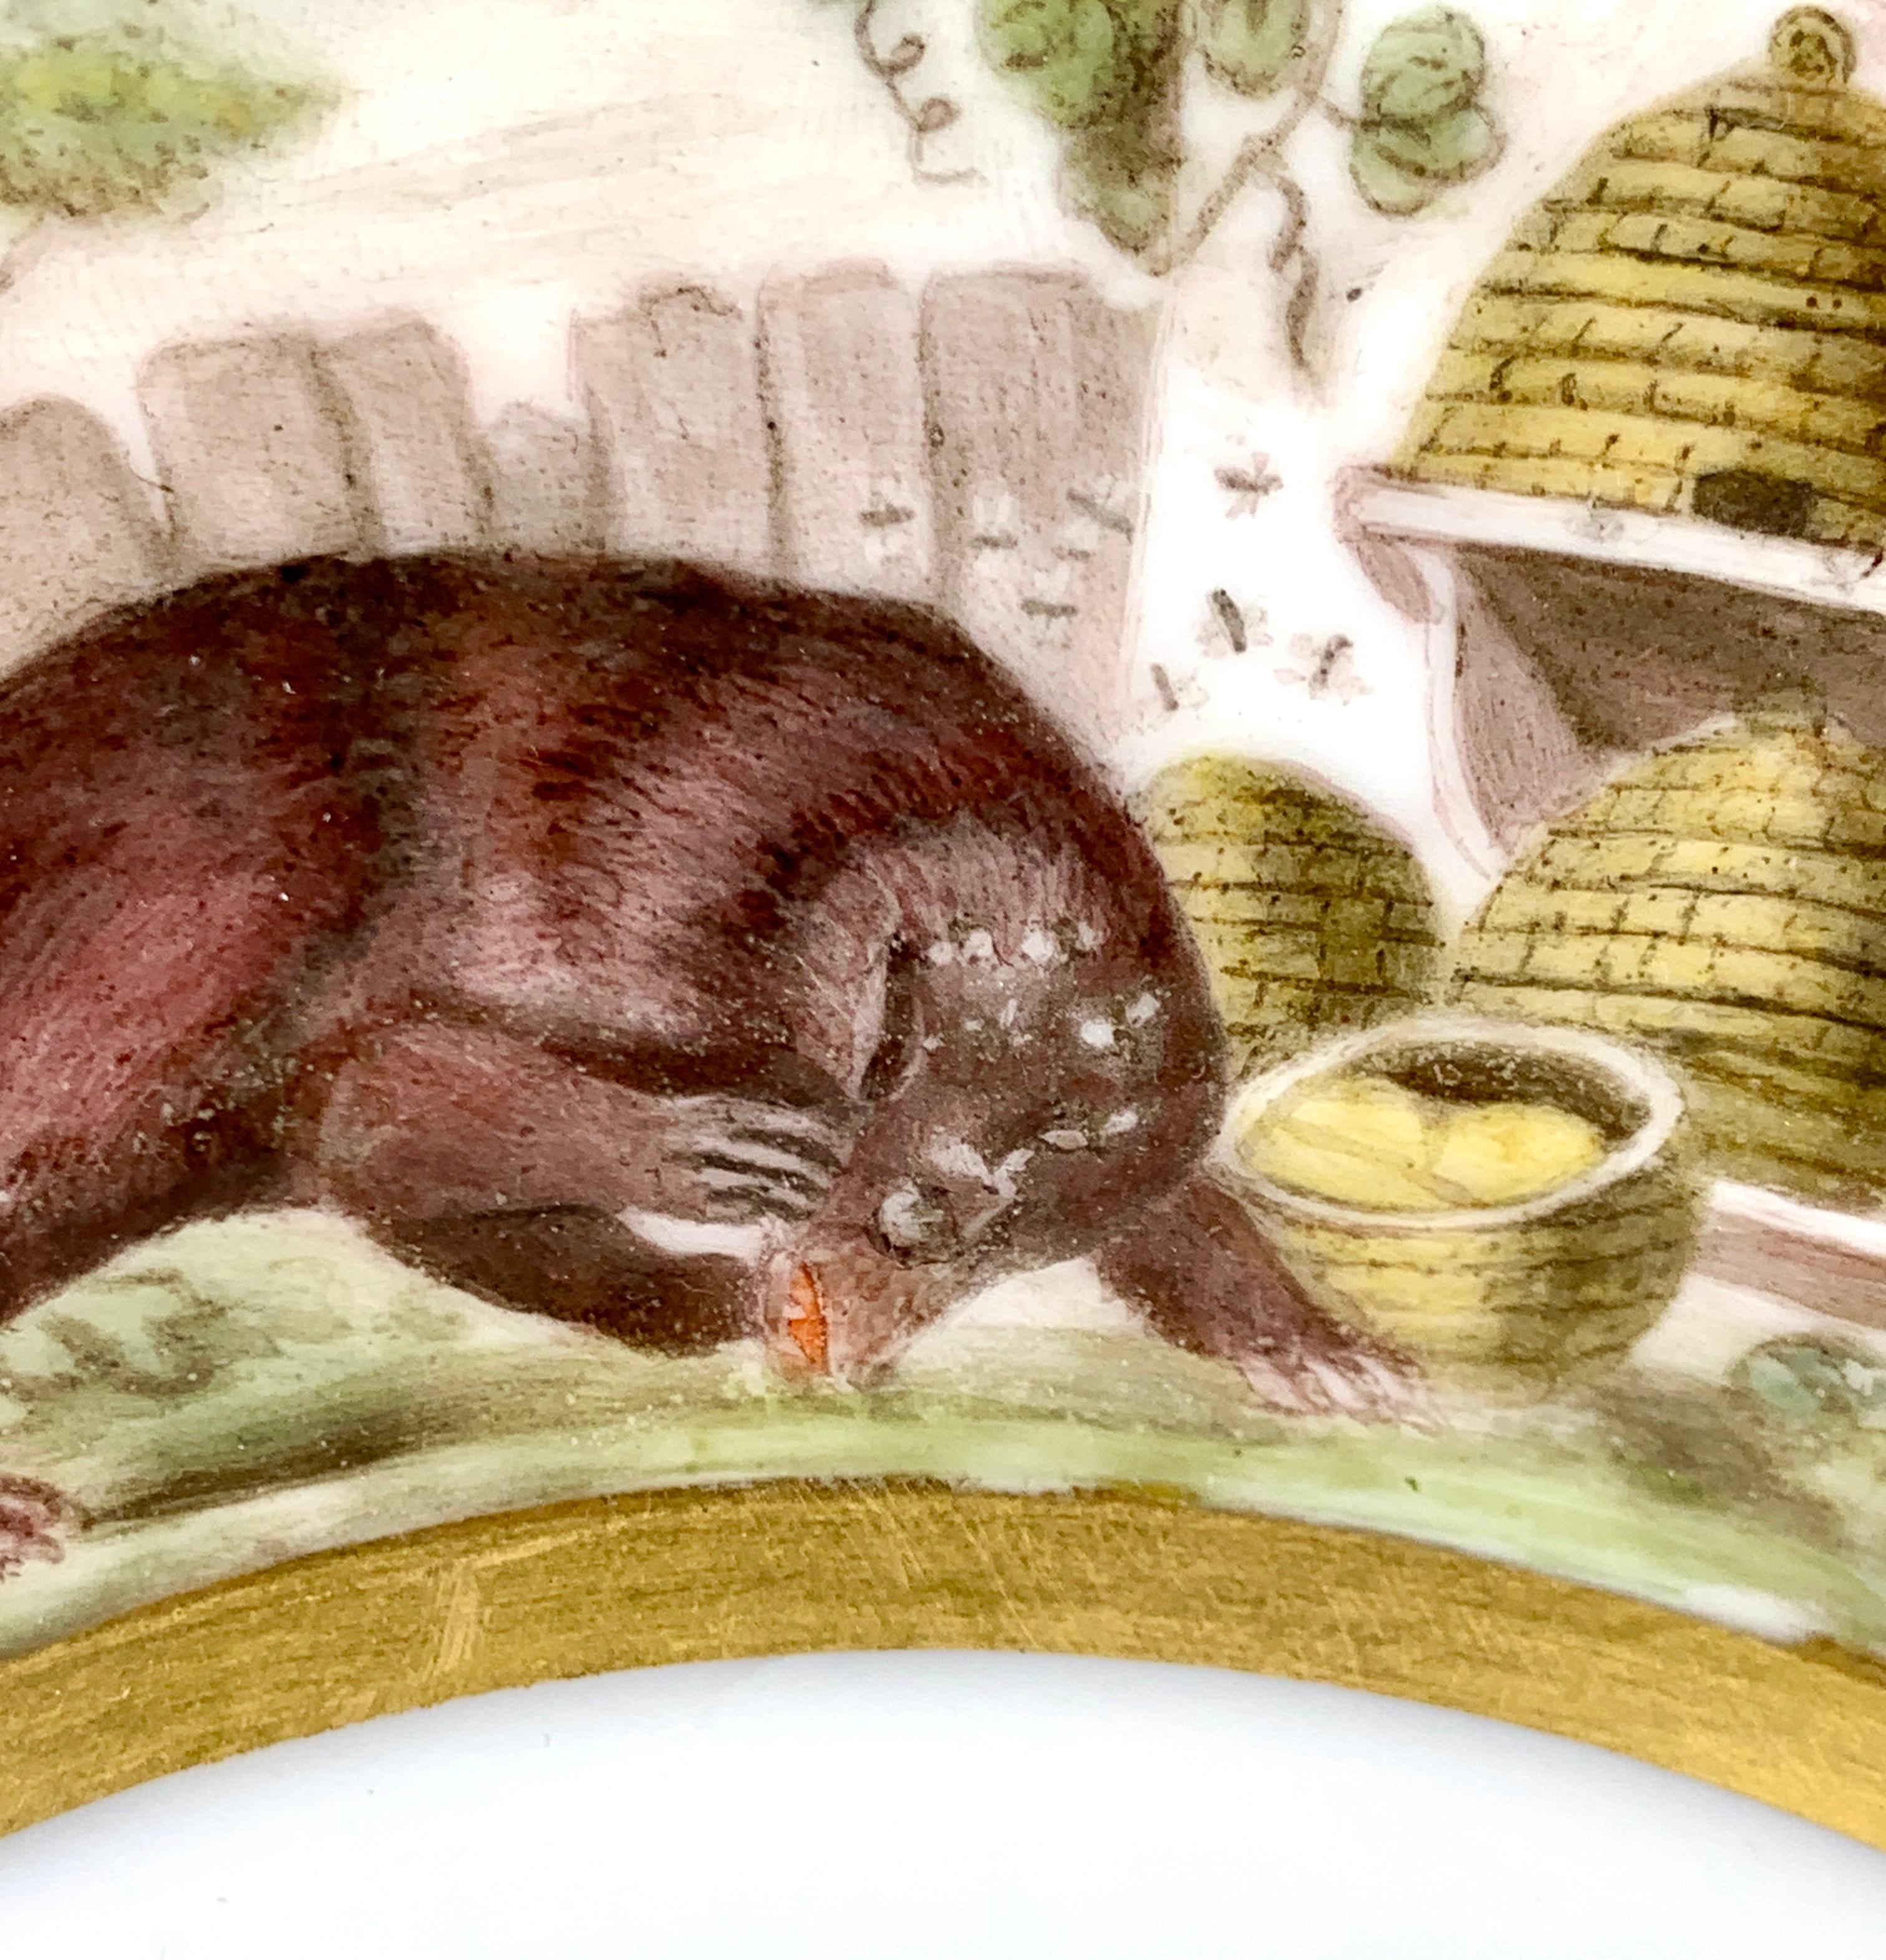 Aesop's Fables Animals on Antique French Porcelain Plate Hand Painted circa 1825 For Sale 3